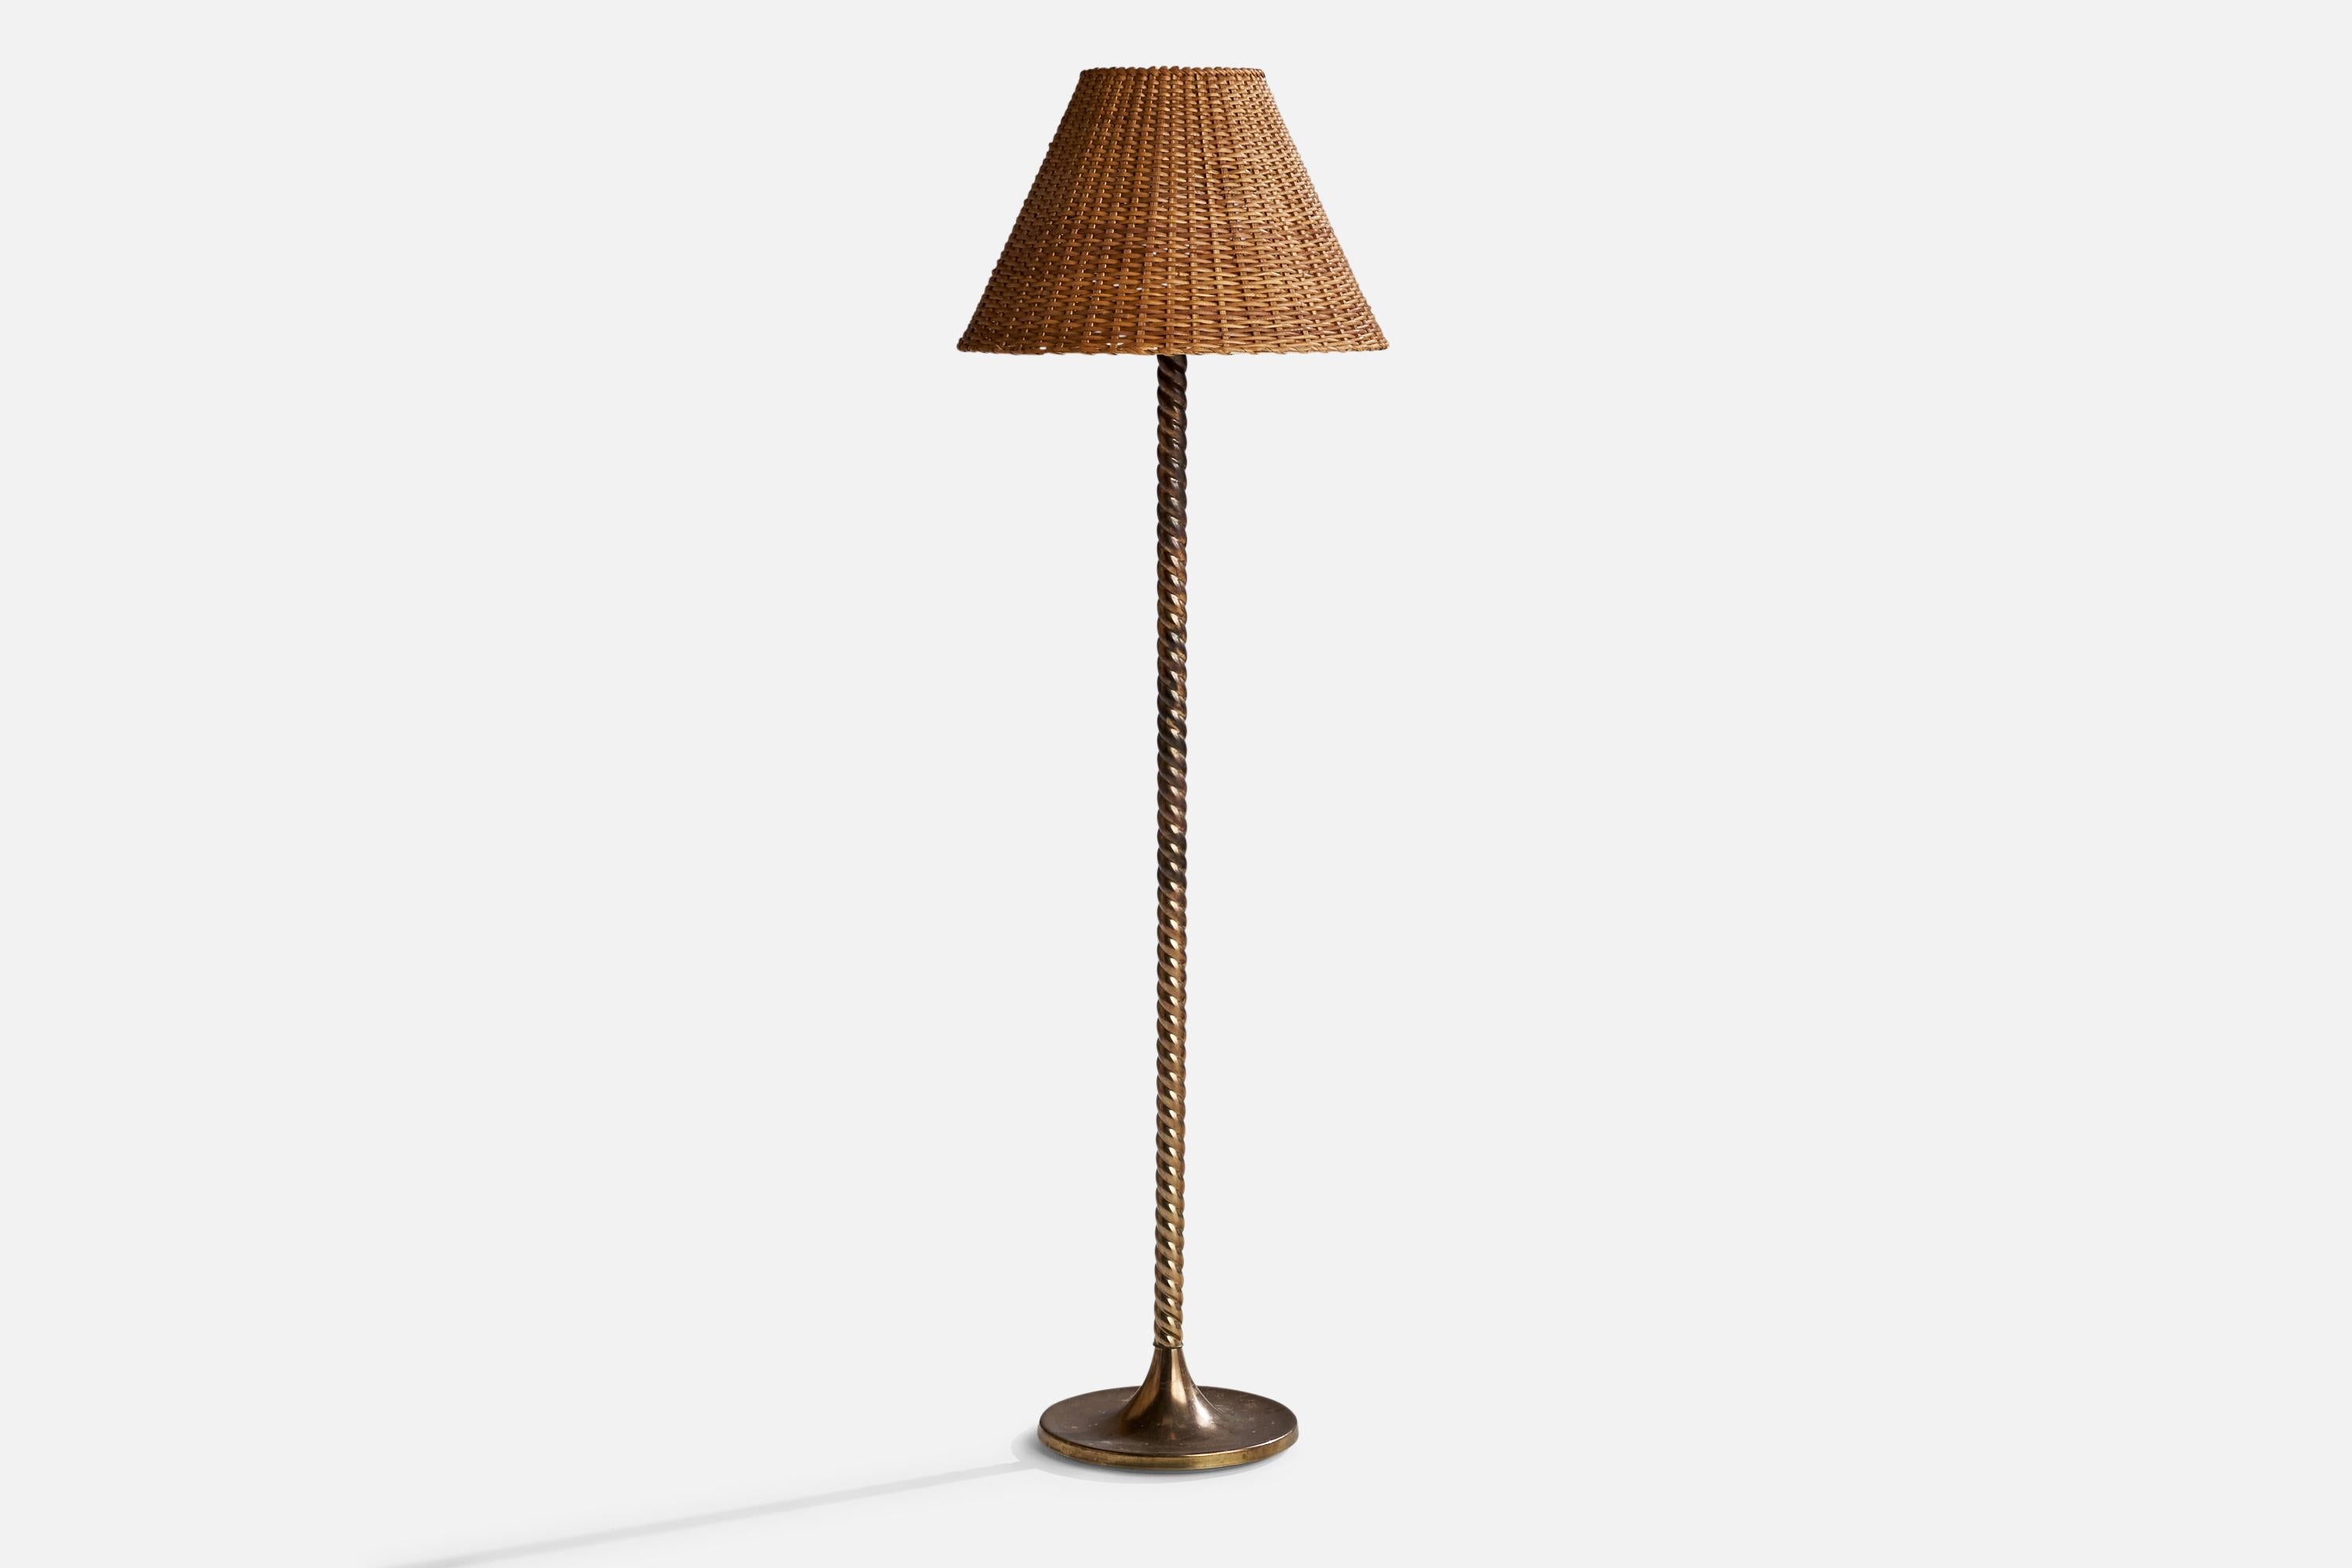 A brass and rattan floor lamp designed and produced by TSAR, Sweden, c. 1970.

Overall Dimensions (inches): 56” H x 17”  W x 18” D
Stated dimensions include shade.
Bulb Specifications: E-26 Bulb
Number of Sockets: 1
All lighting will be converted